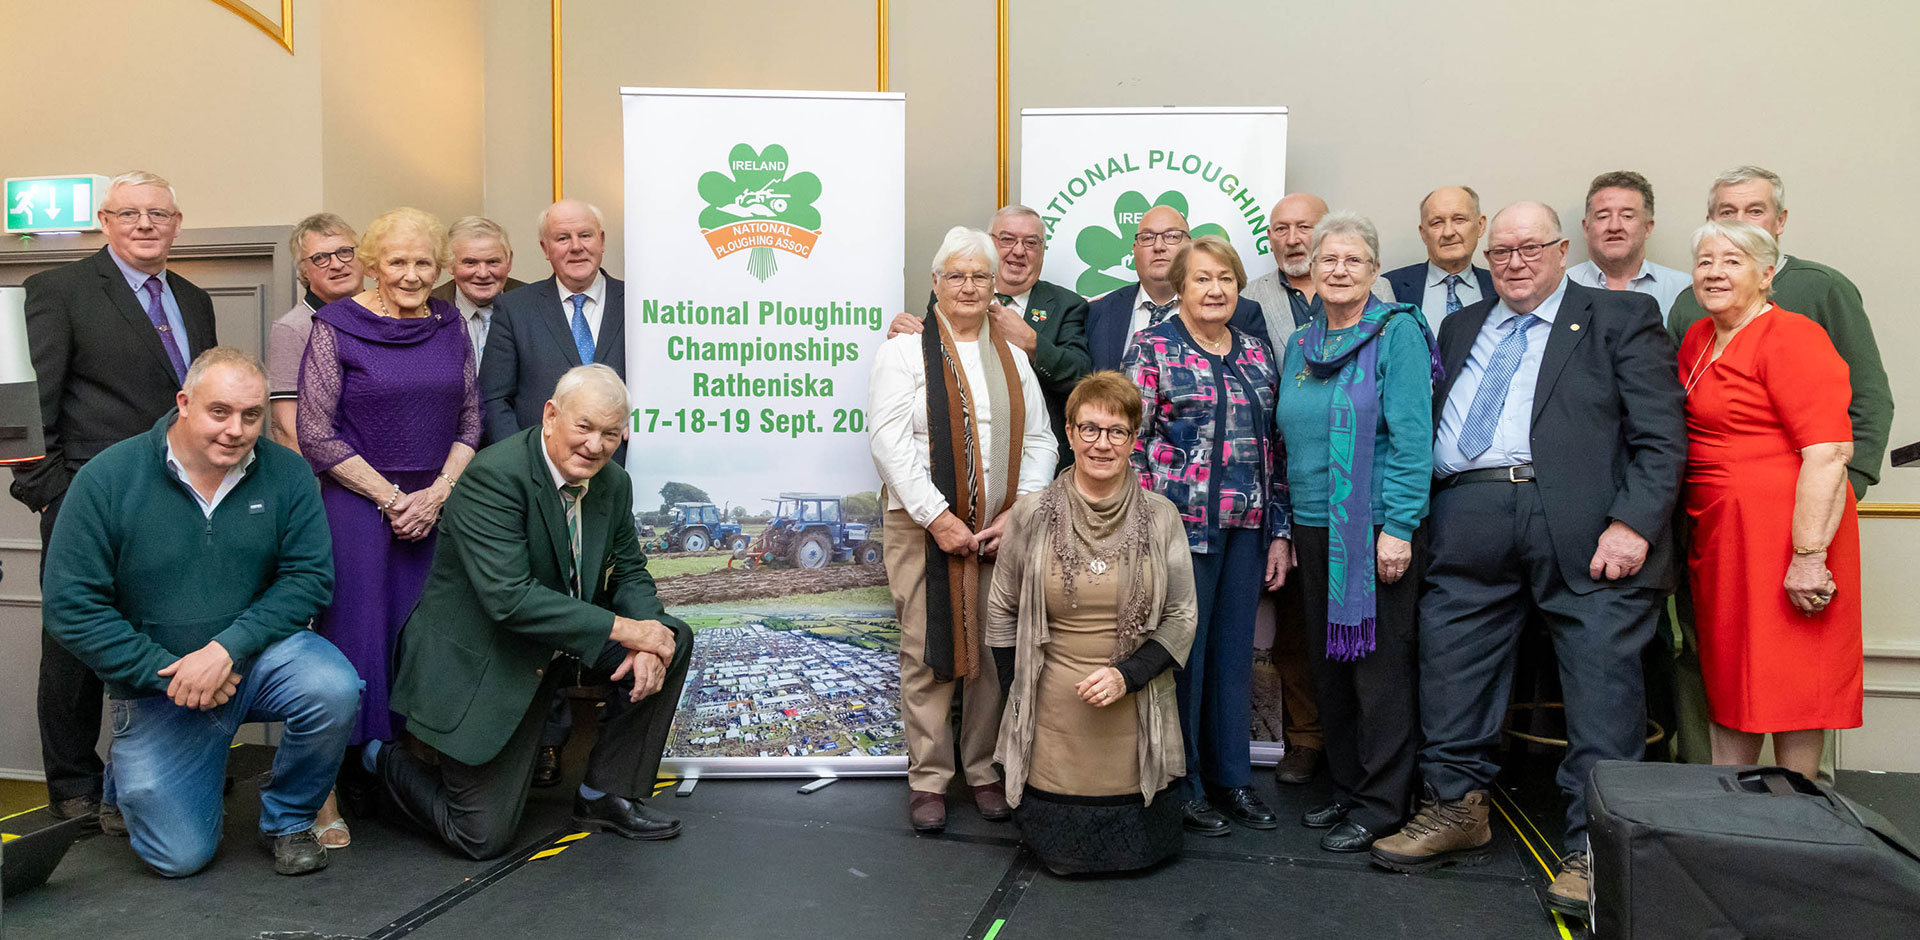 The 93rd National Ploughing Championships will take place in Ratheniska